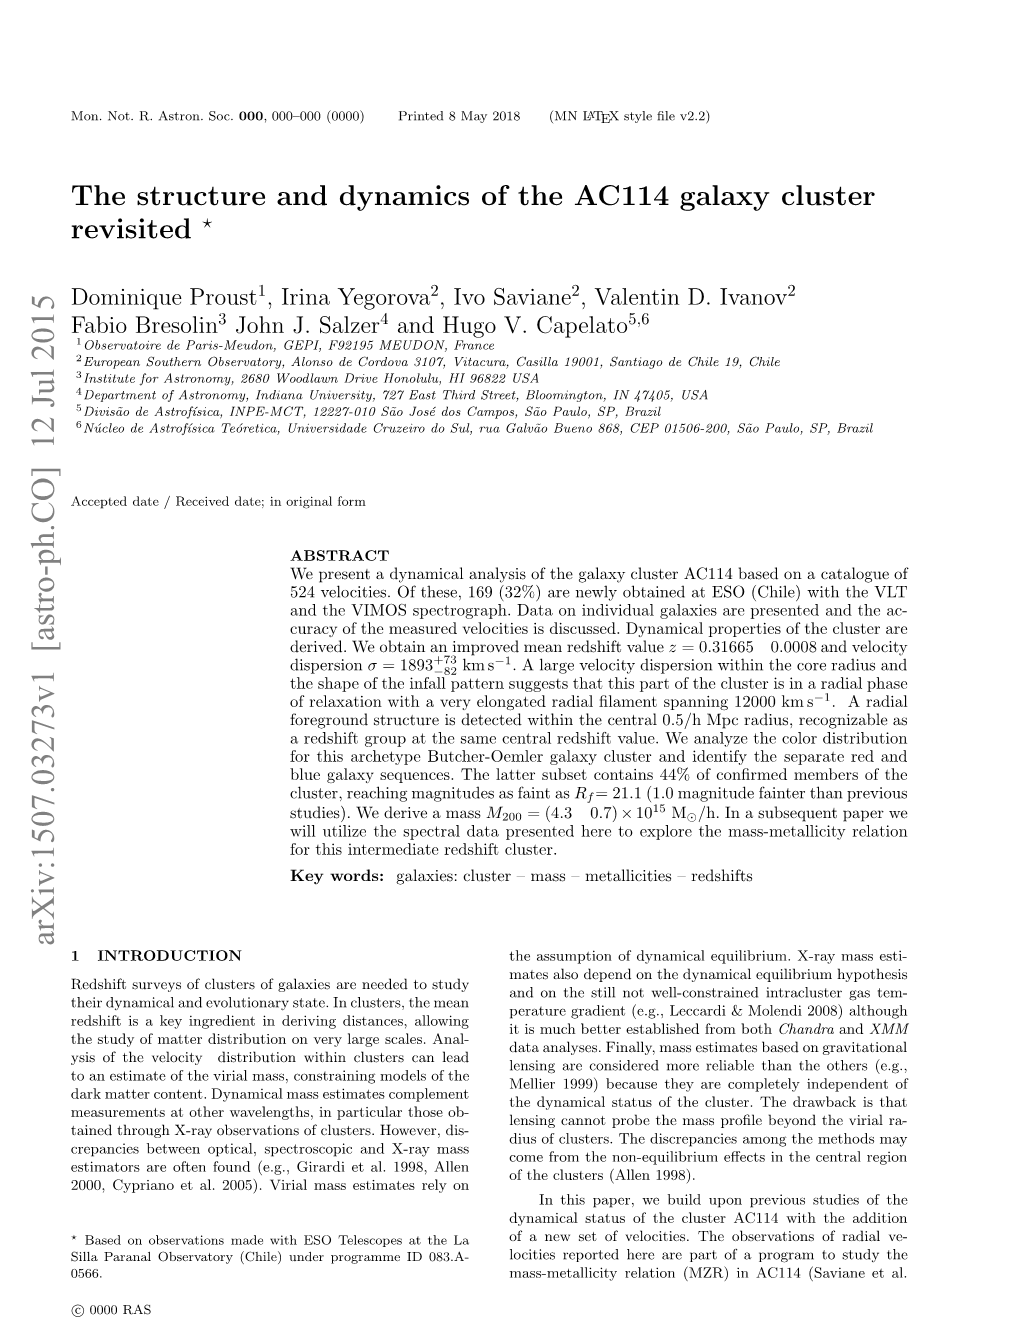 The Structure and Dynamics of the AC114 Galaxy Cluster Revisited